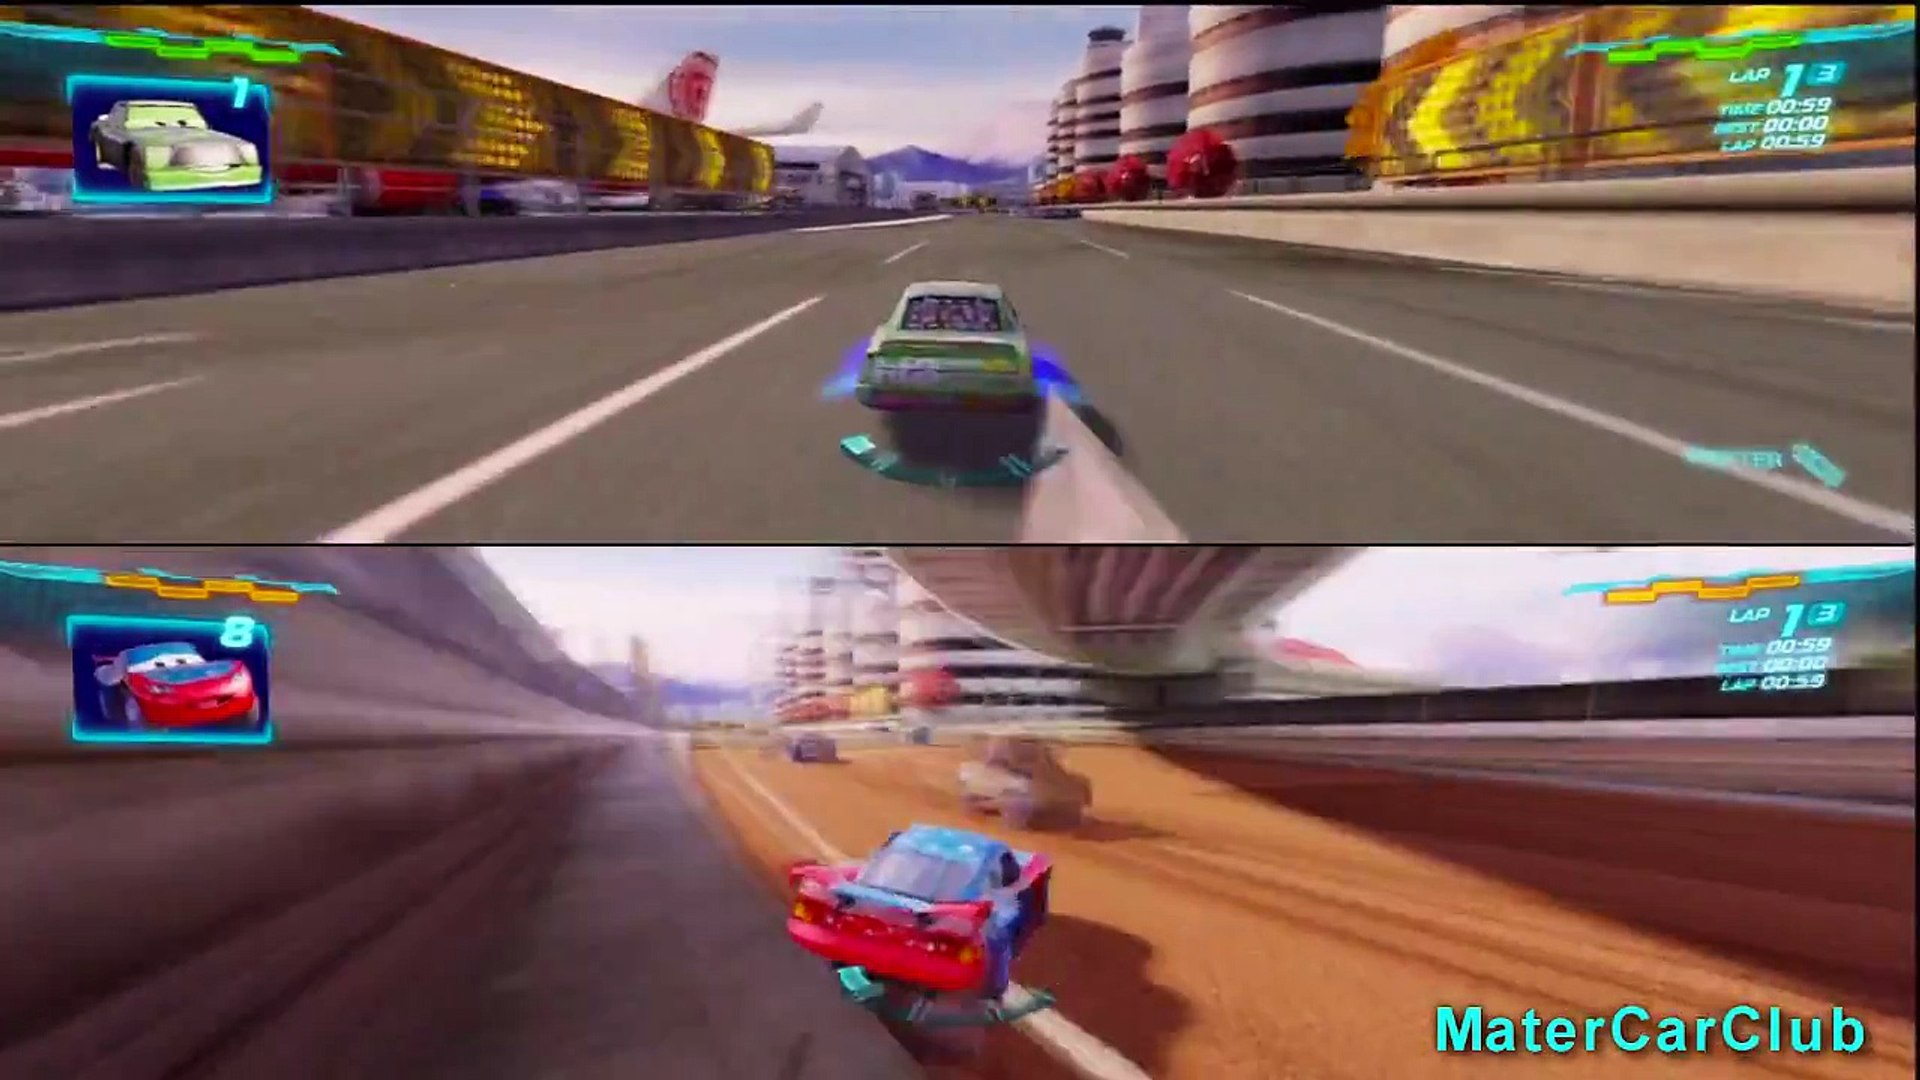 PS3 Cars 2 The Video Game Chick Hicks vs Daredevil Lightning McQueen Battle  Race! - Dailymotion Video